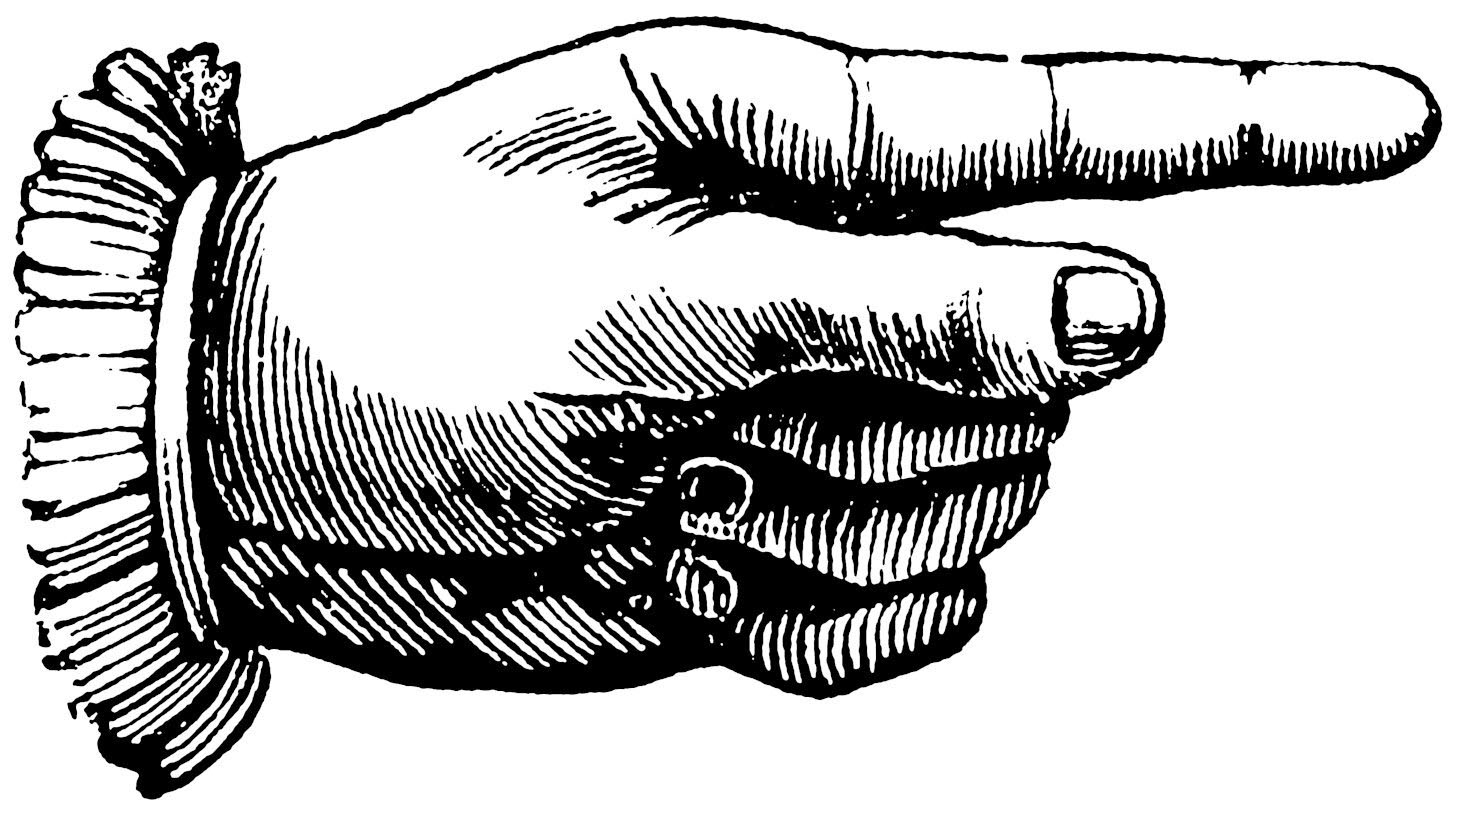 File:Typographic Ornaments - Pointing Hand.jpg - Wikimedia Commons